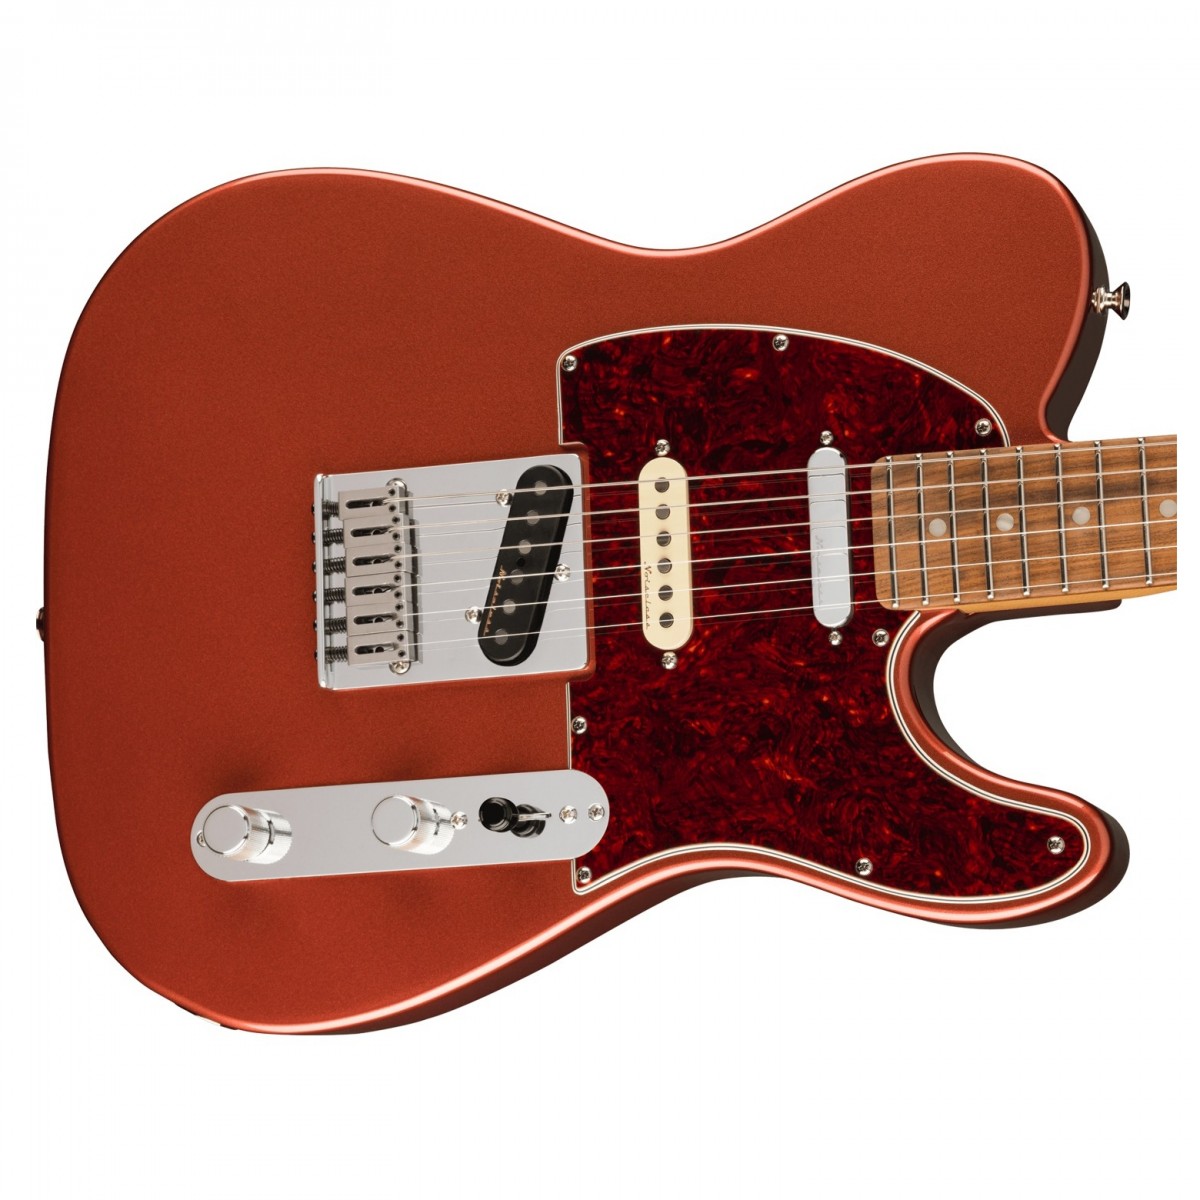 FENDER PLAYER PLUS NASHVILLE TELECASTER PF AGED CANDY APPLE RED CHITARRA ELETTRICA 22 TASTI CANDY APPLE RED 2